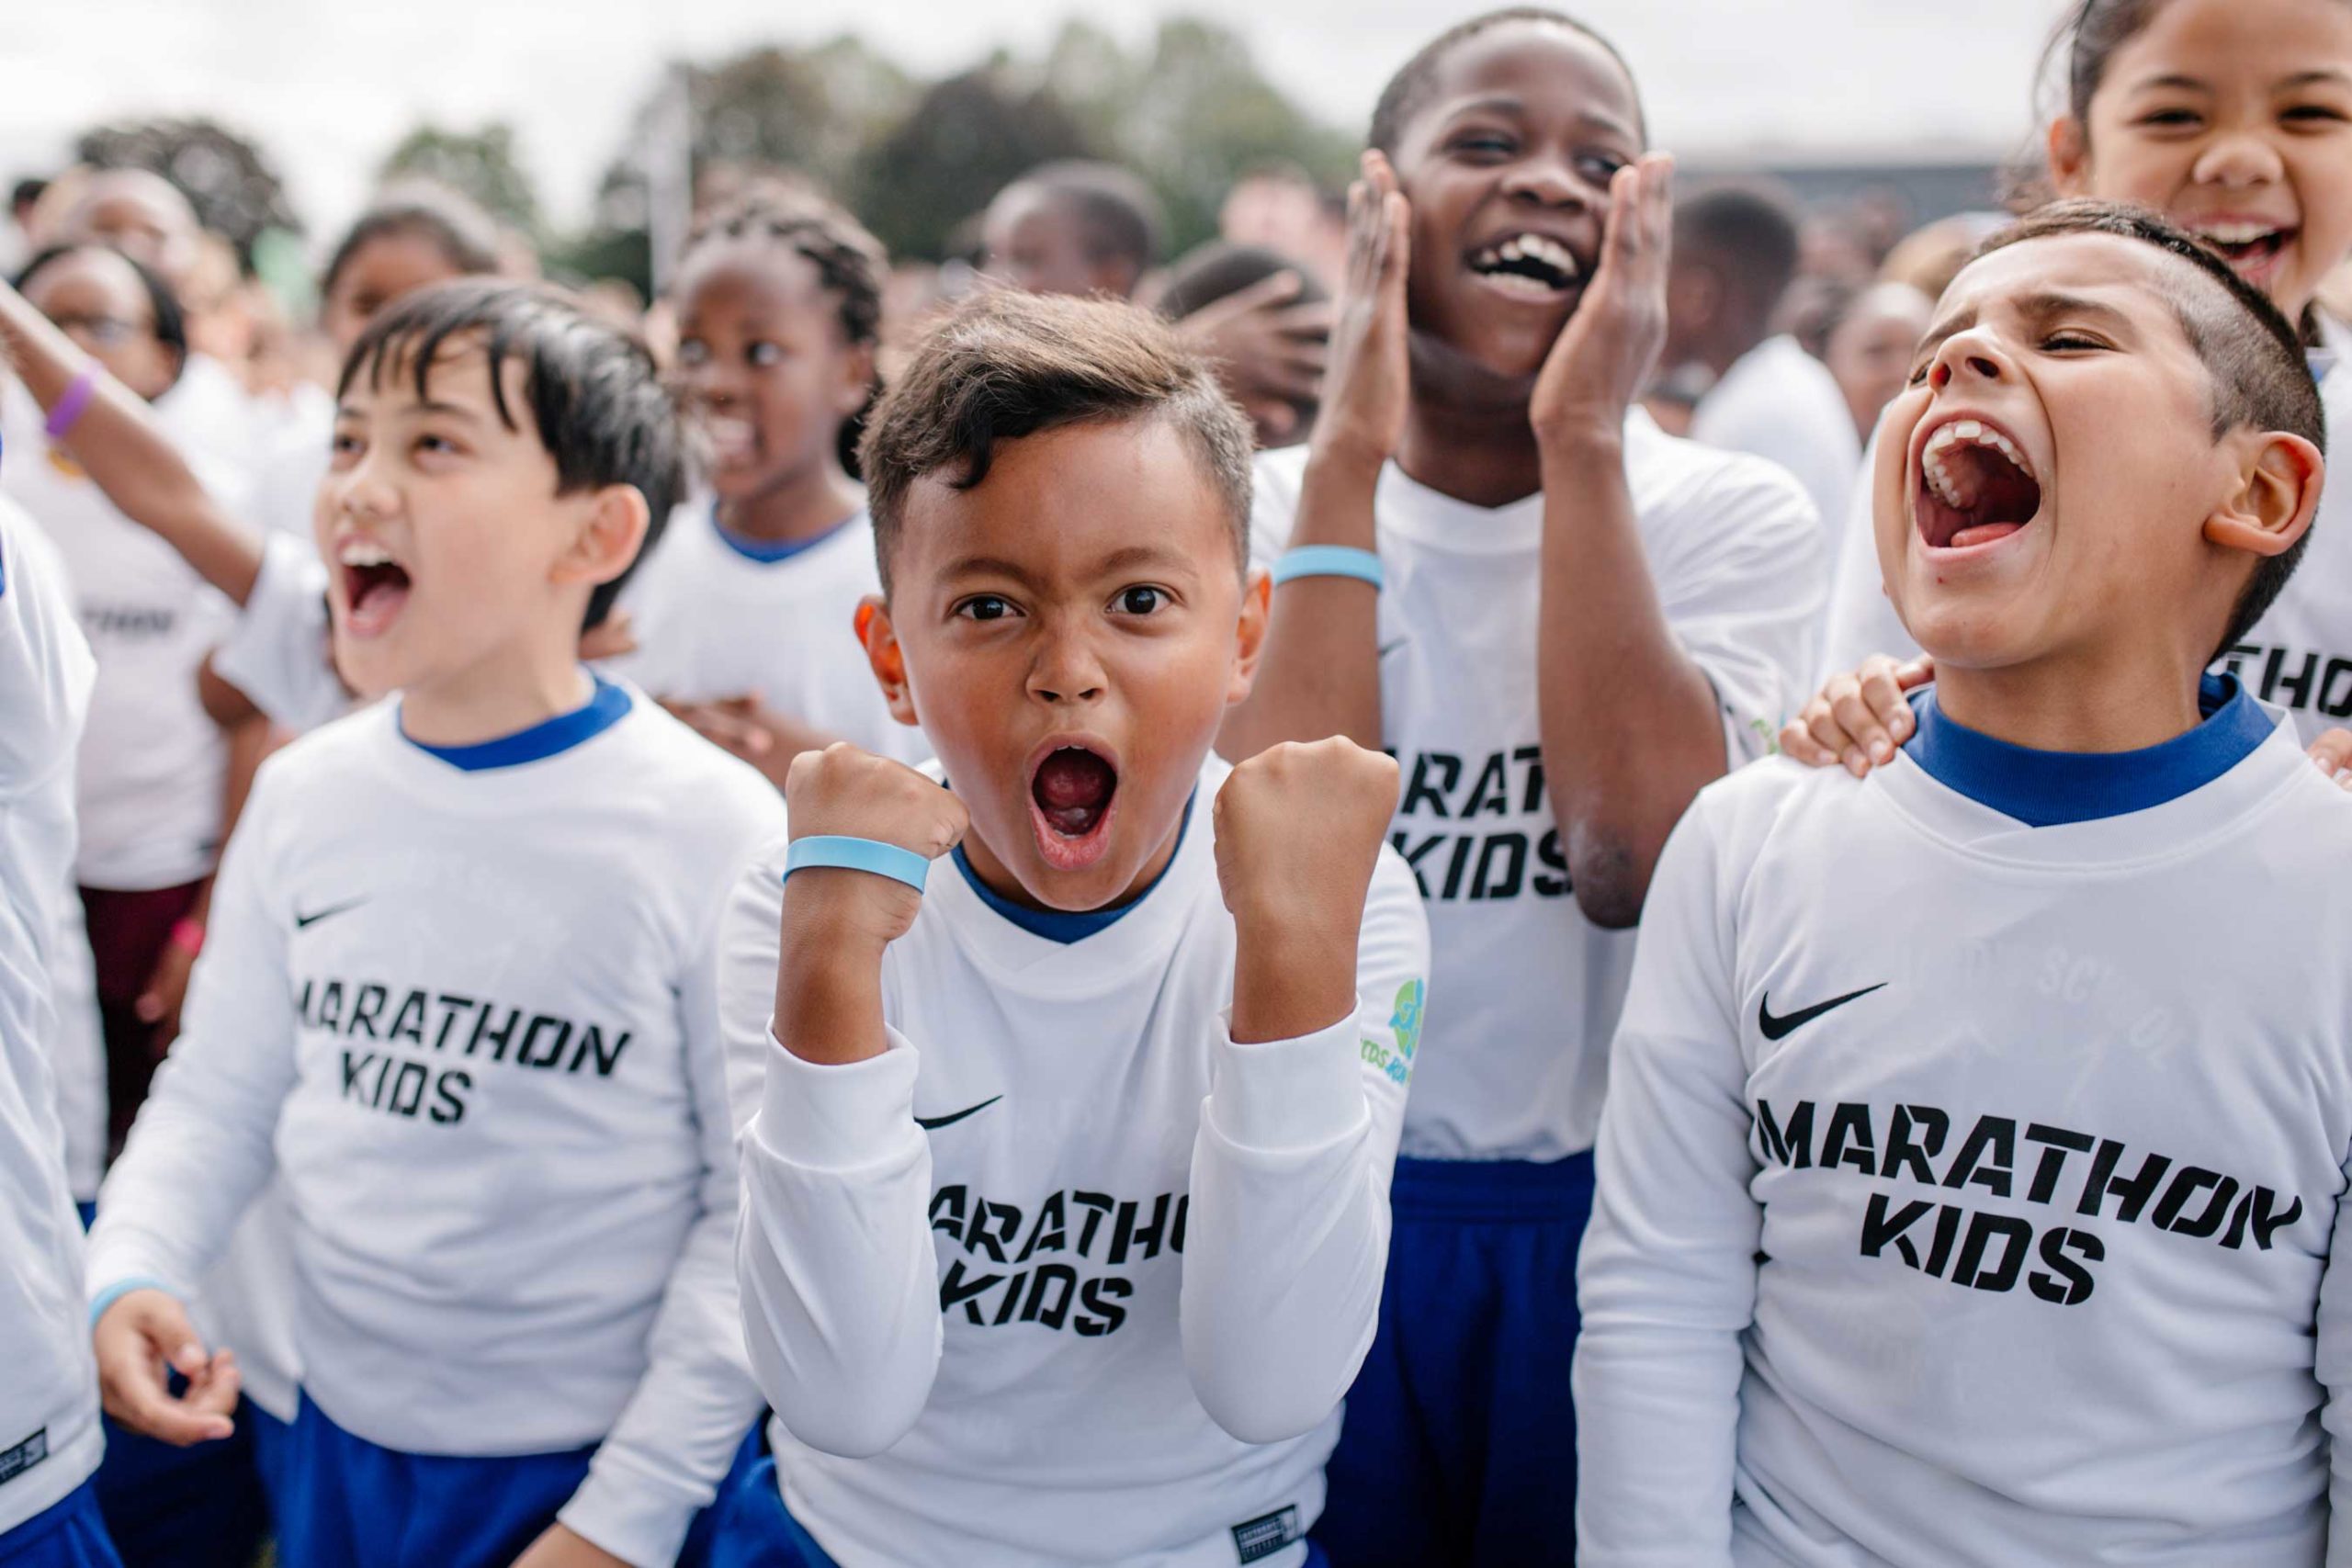 Marathon Kids is a youth fitness nonprofit dedicated to getting kids moving.